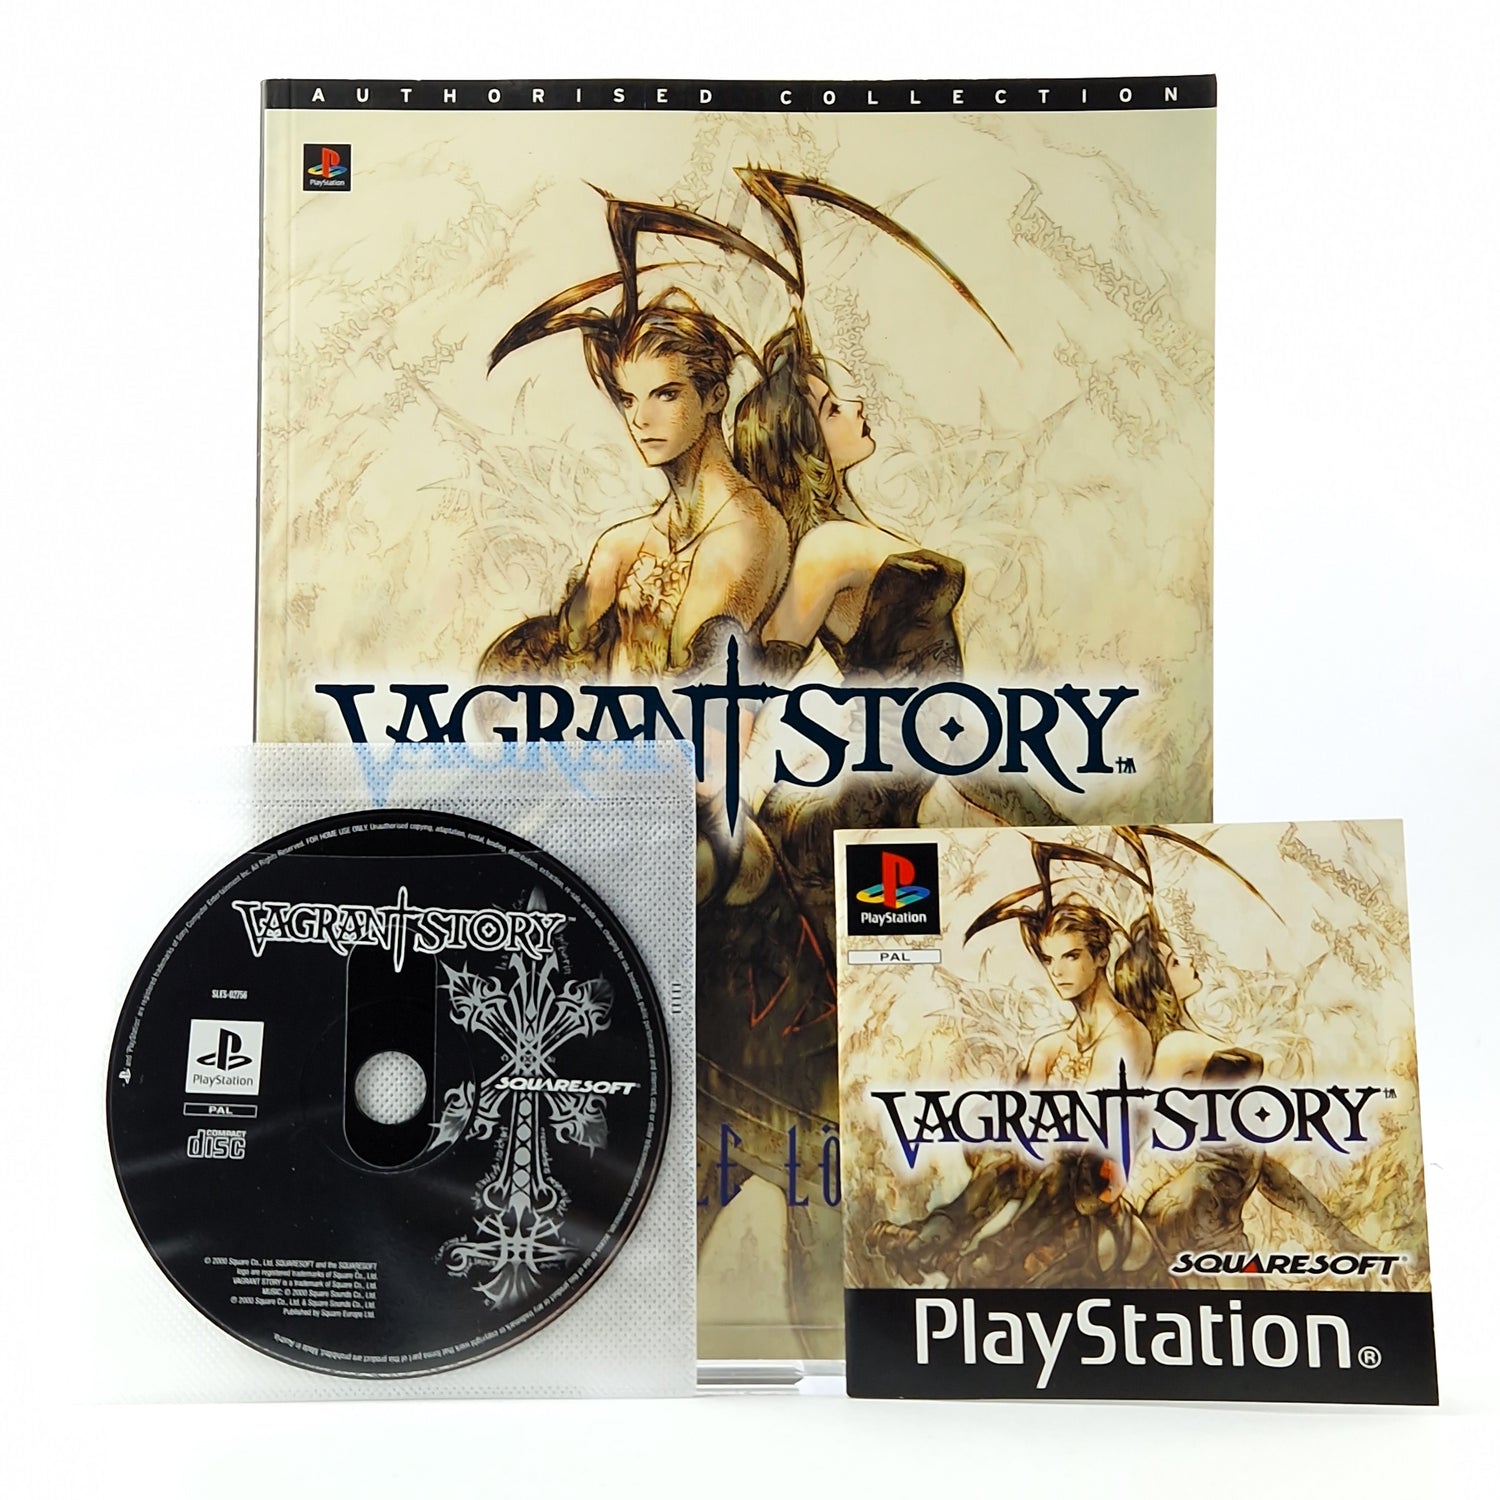 Playstation 1 Spiel : Vagrant Story - CD + Anleitung mit Lösungsbuch Guide PS1